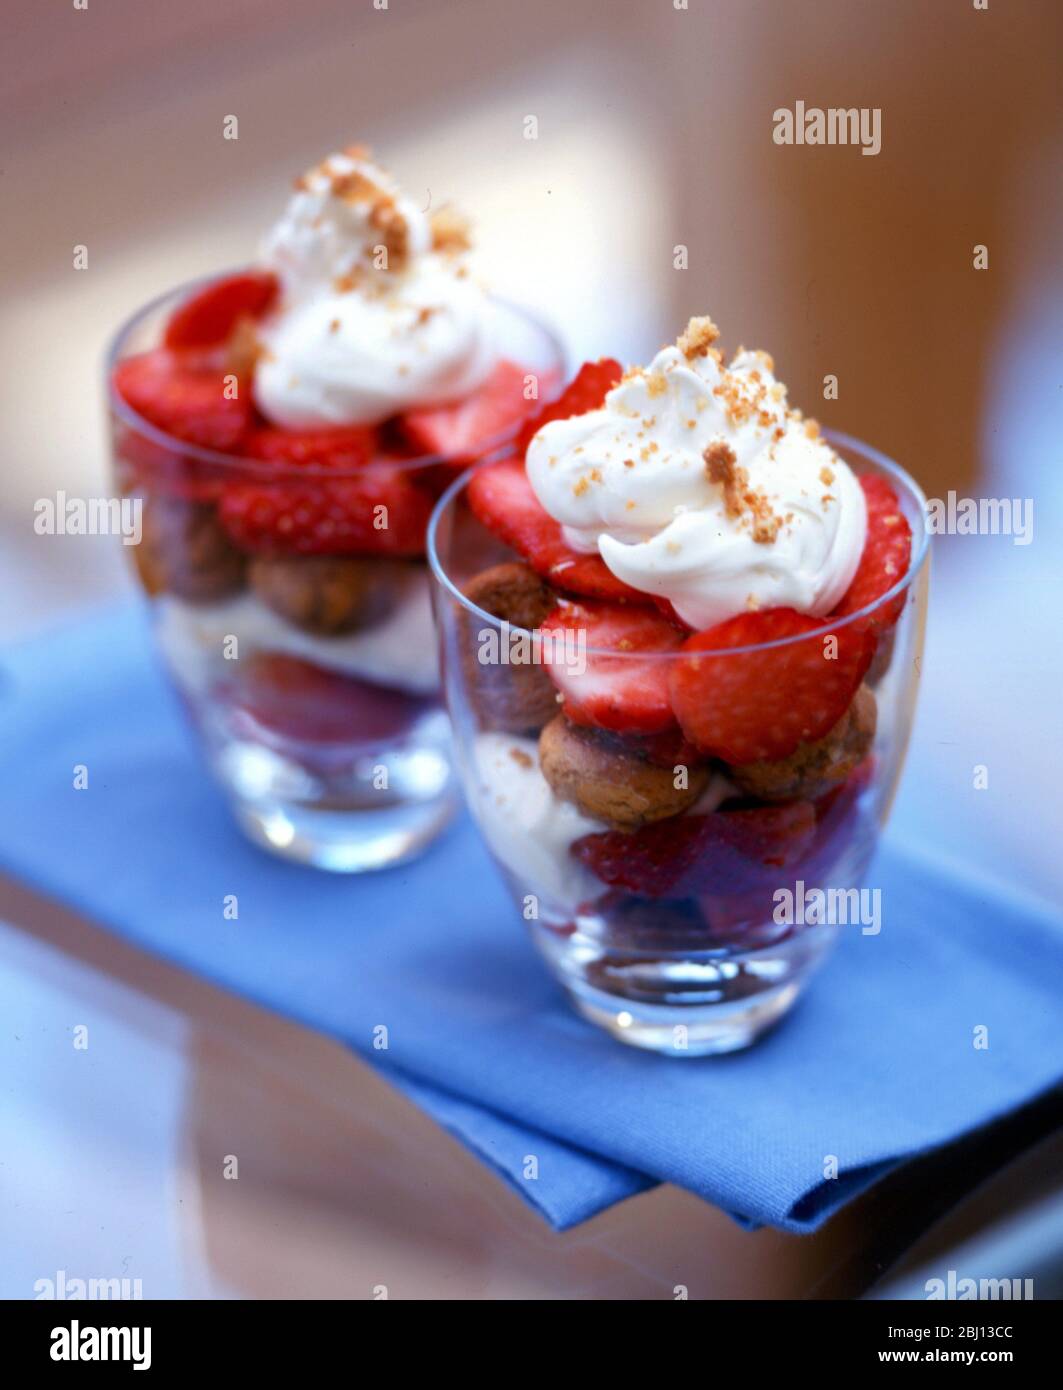 Summer dessert of ratafia biscuits with fresh, halved strawberries and whipped cream with chopped nut topping - Stock Photo